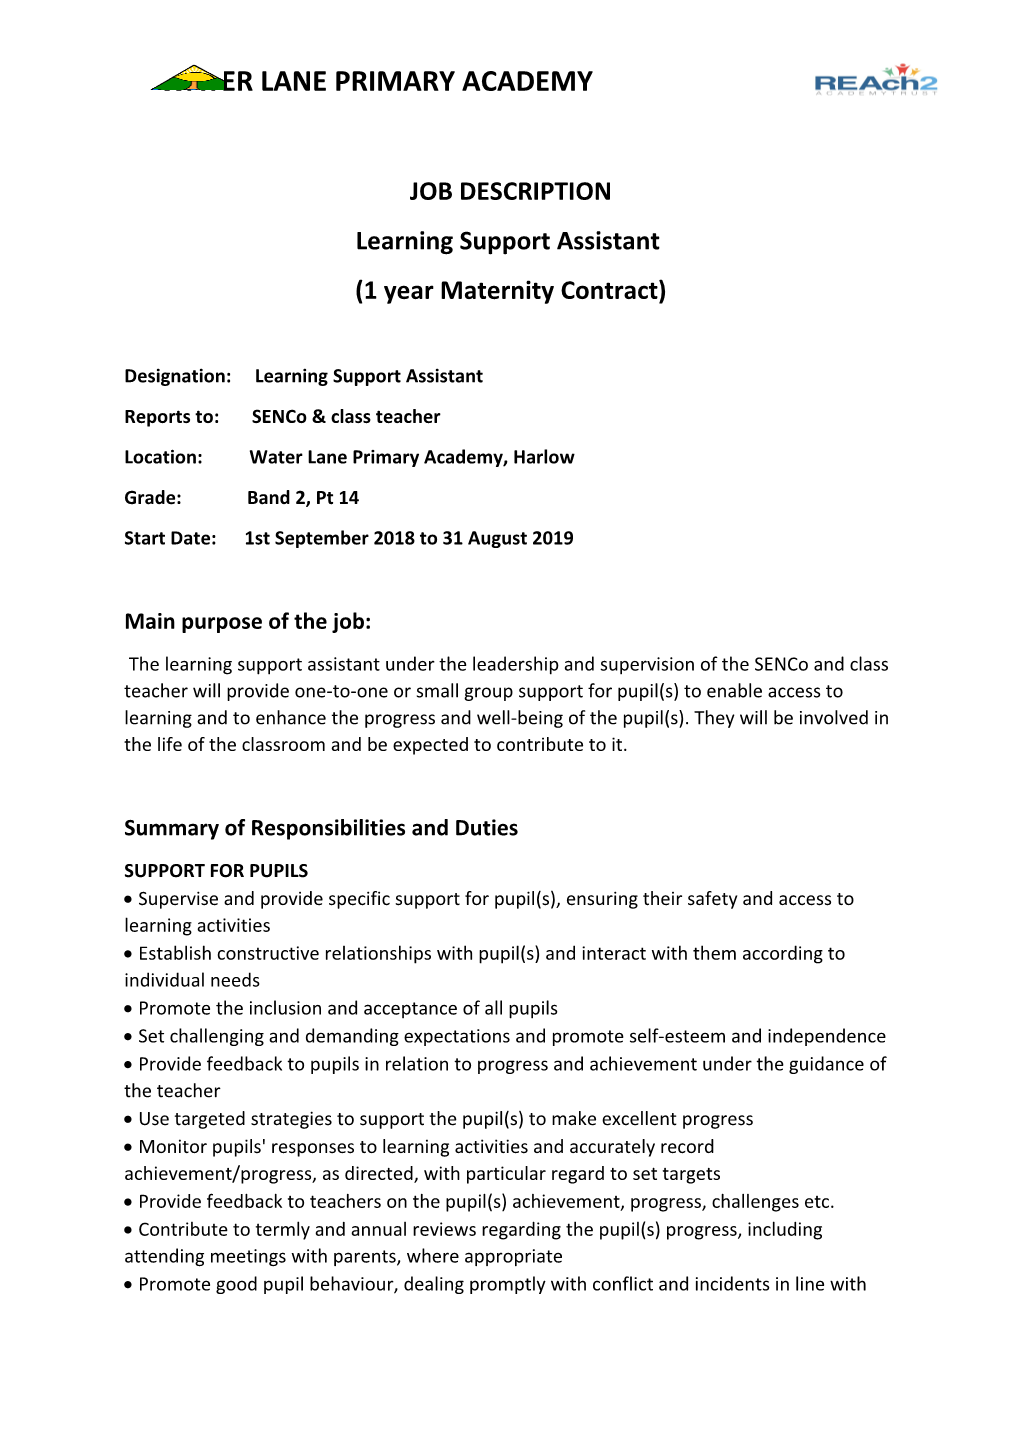 Designation: Learning Support Assistant